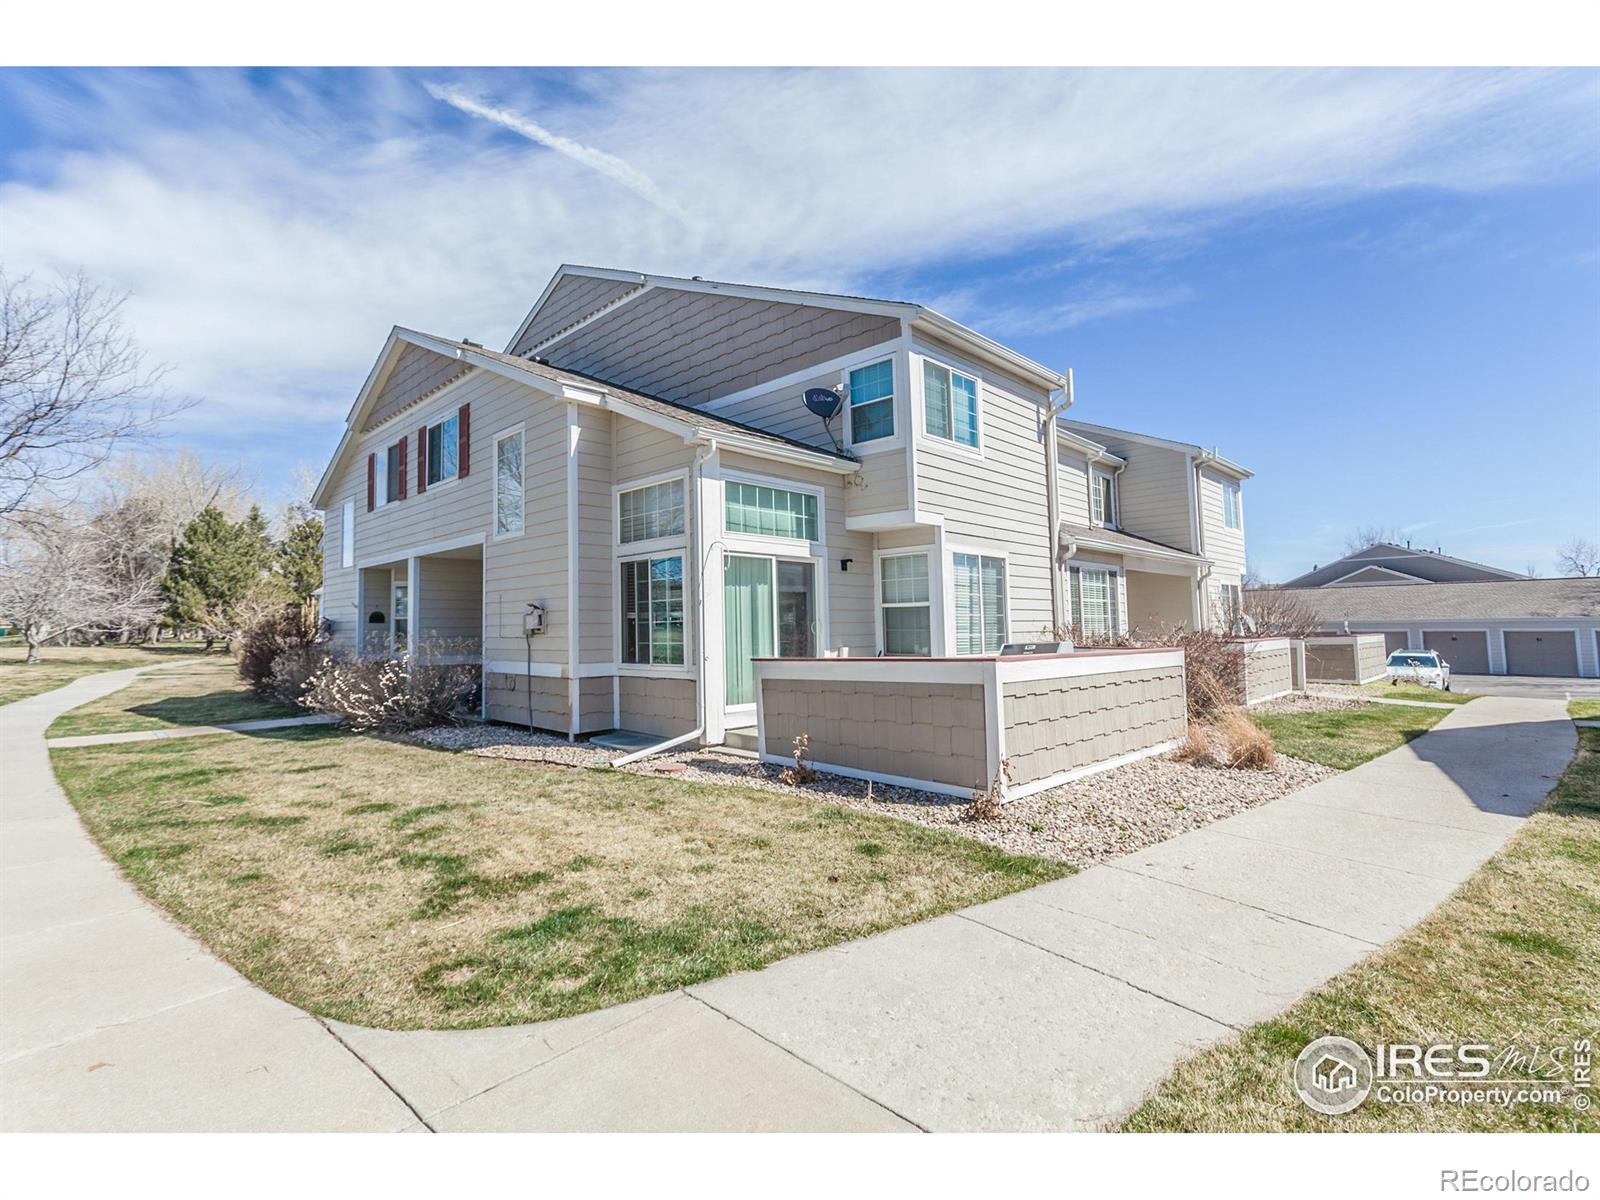 2502  Timberwood Drive, fort collins MLS: 4567891006799 Beds: 2 Baths: 3 Price: $385,000